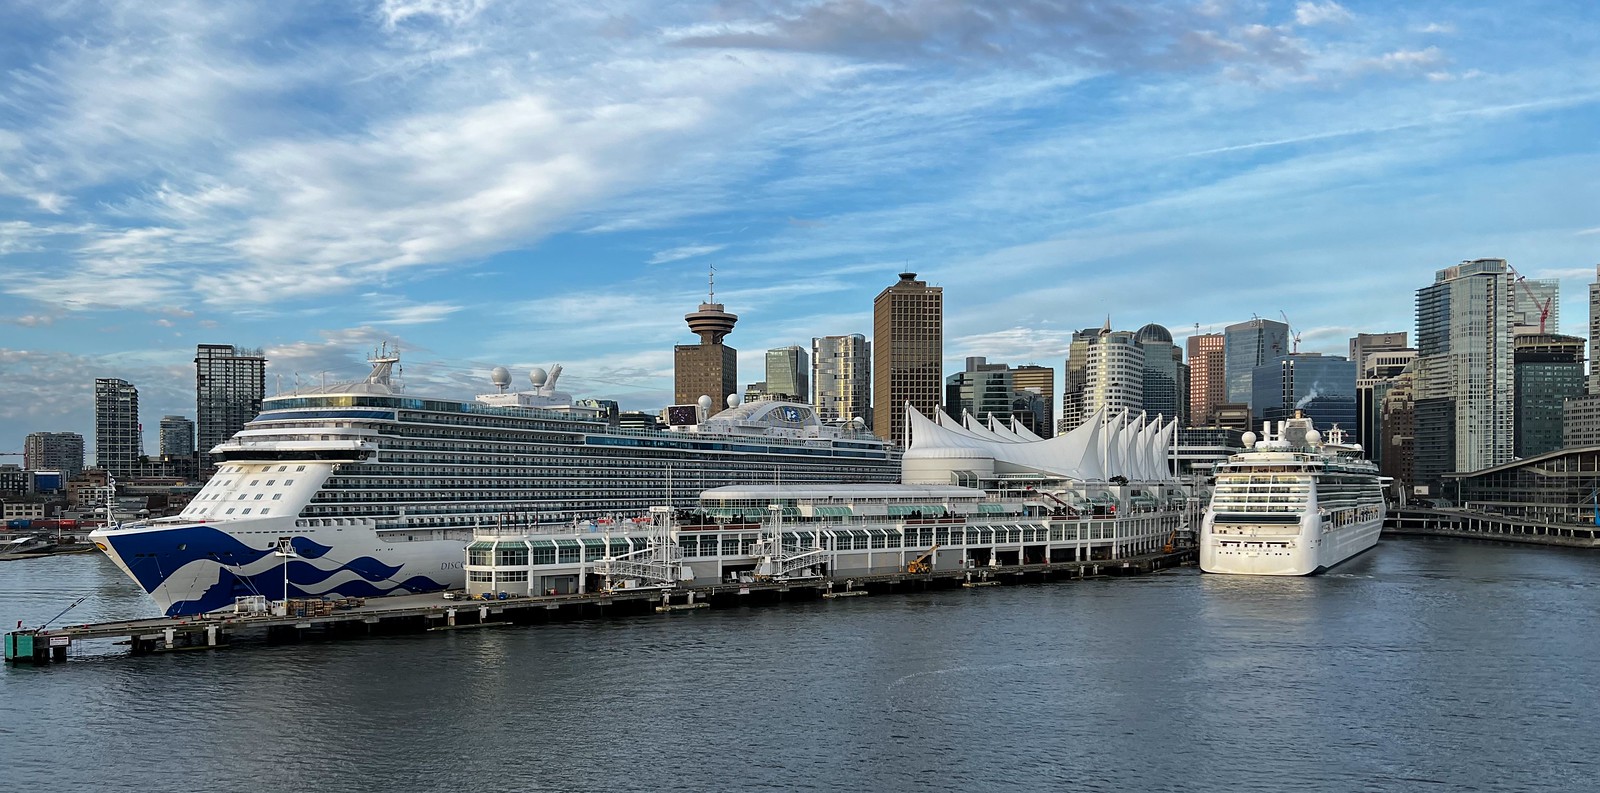 Discovery Princess and Brillance of the Seas ahead of us docked at Canada Place